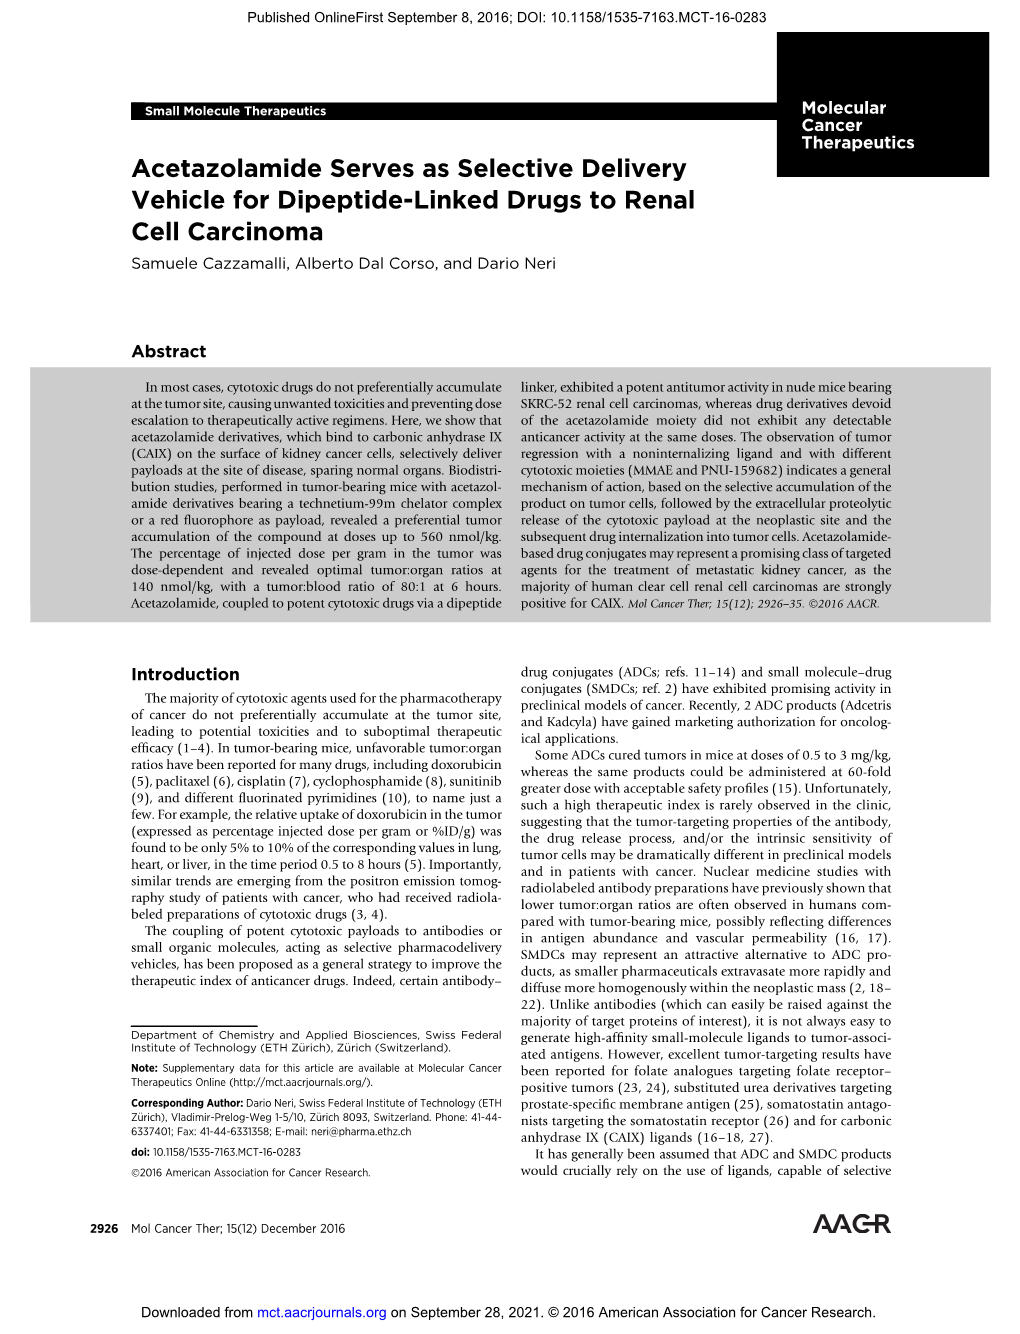 Acetazolamide Serves As Selective Delivery Vehicle for Dipeptide-Linked Drugs to Renal Cell Carcinoma Samuele Cazzamalli, Alberto Dal Corso, and Dario Neri